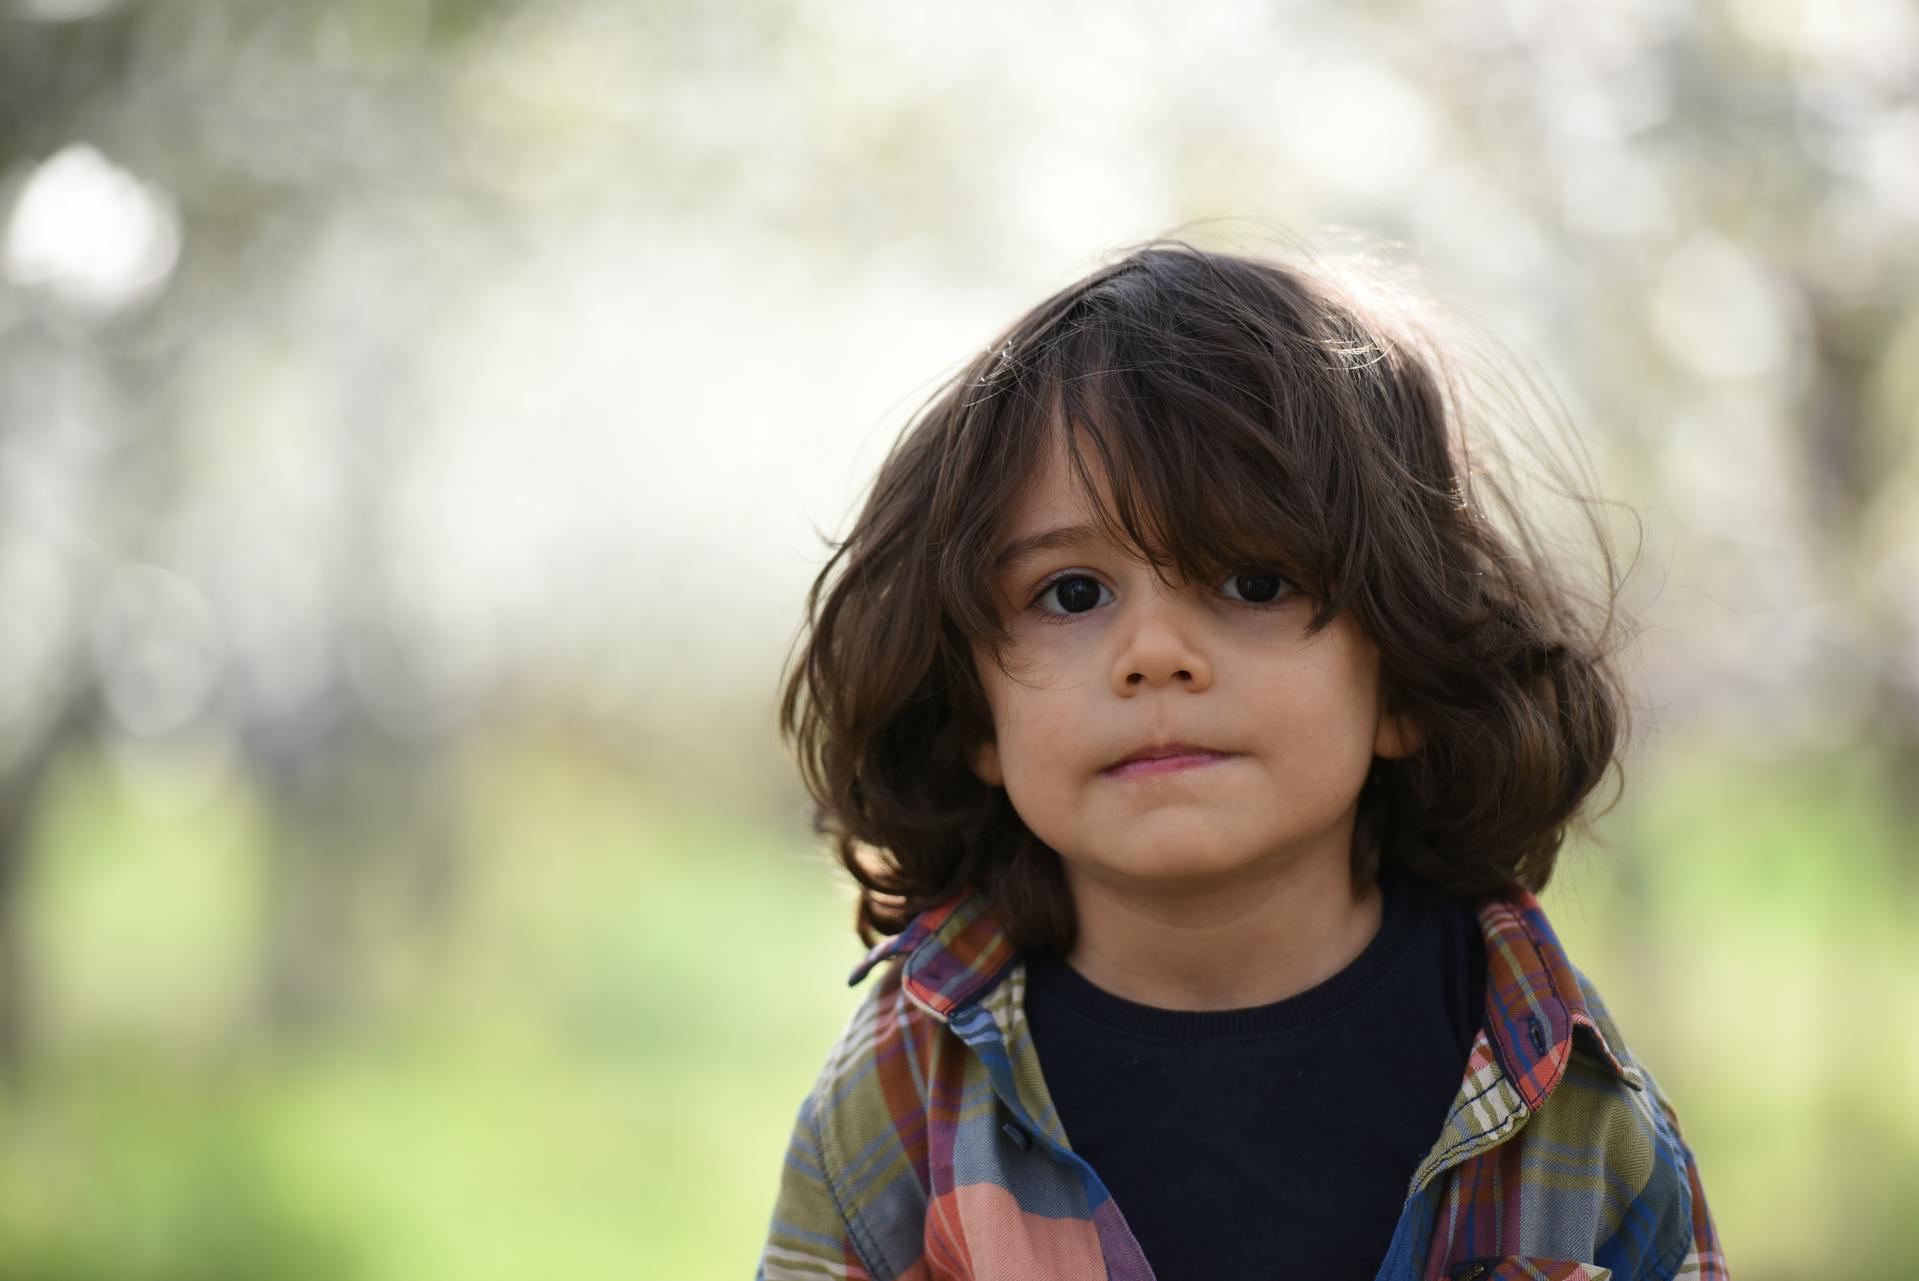 A little boy with long hair | Source: Pexels